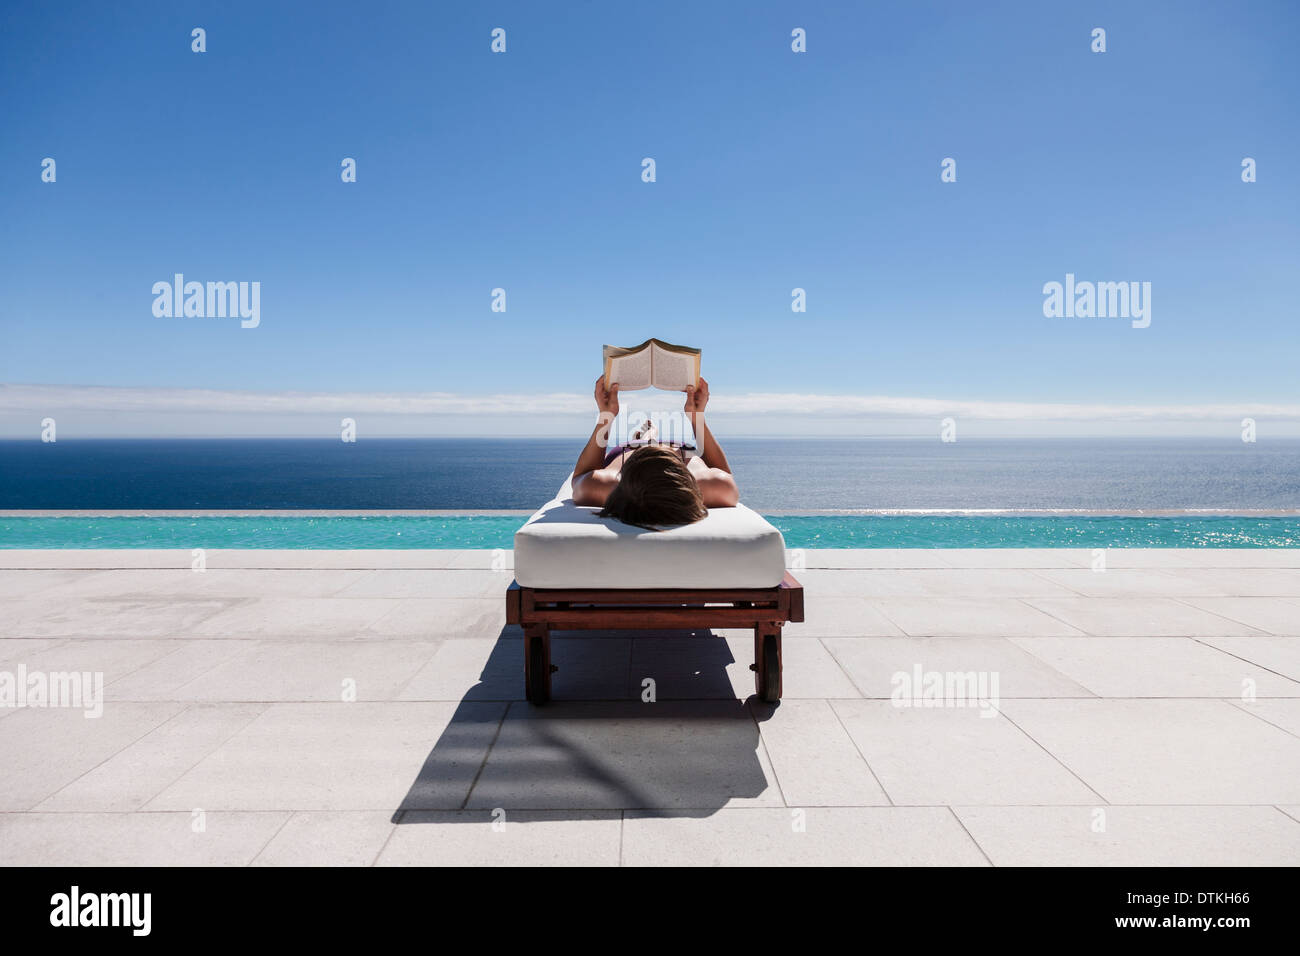 Woman Reading On Lounge Chair At Poolside Overlooking Ocean Stock